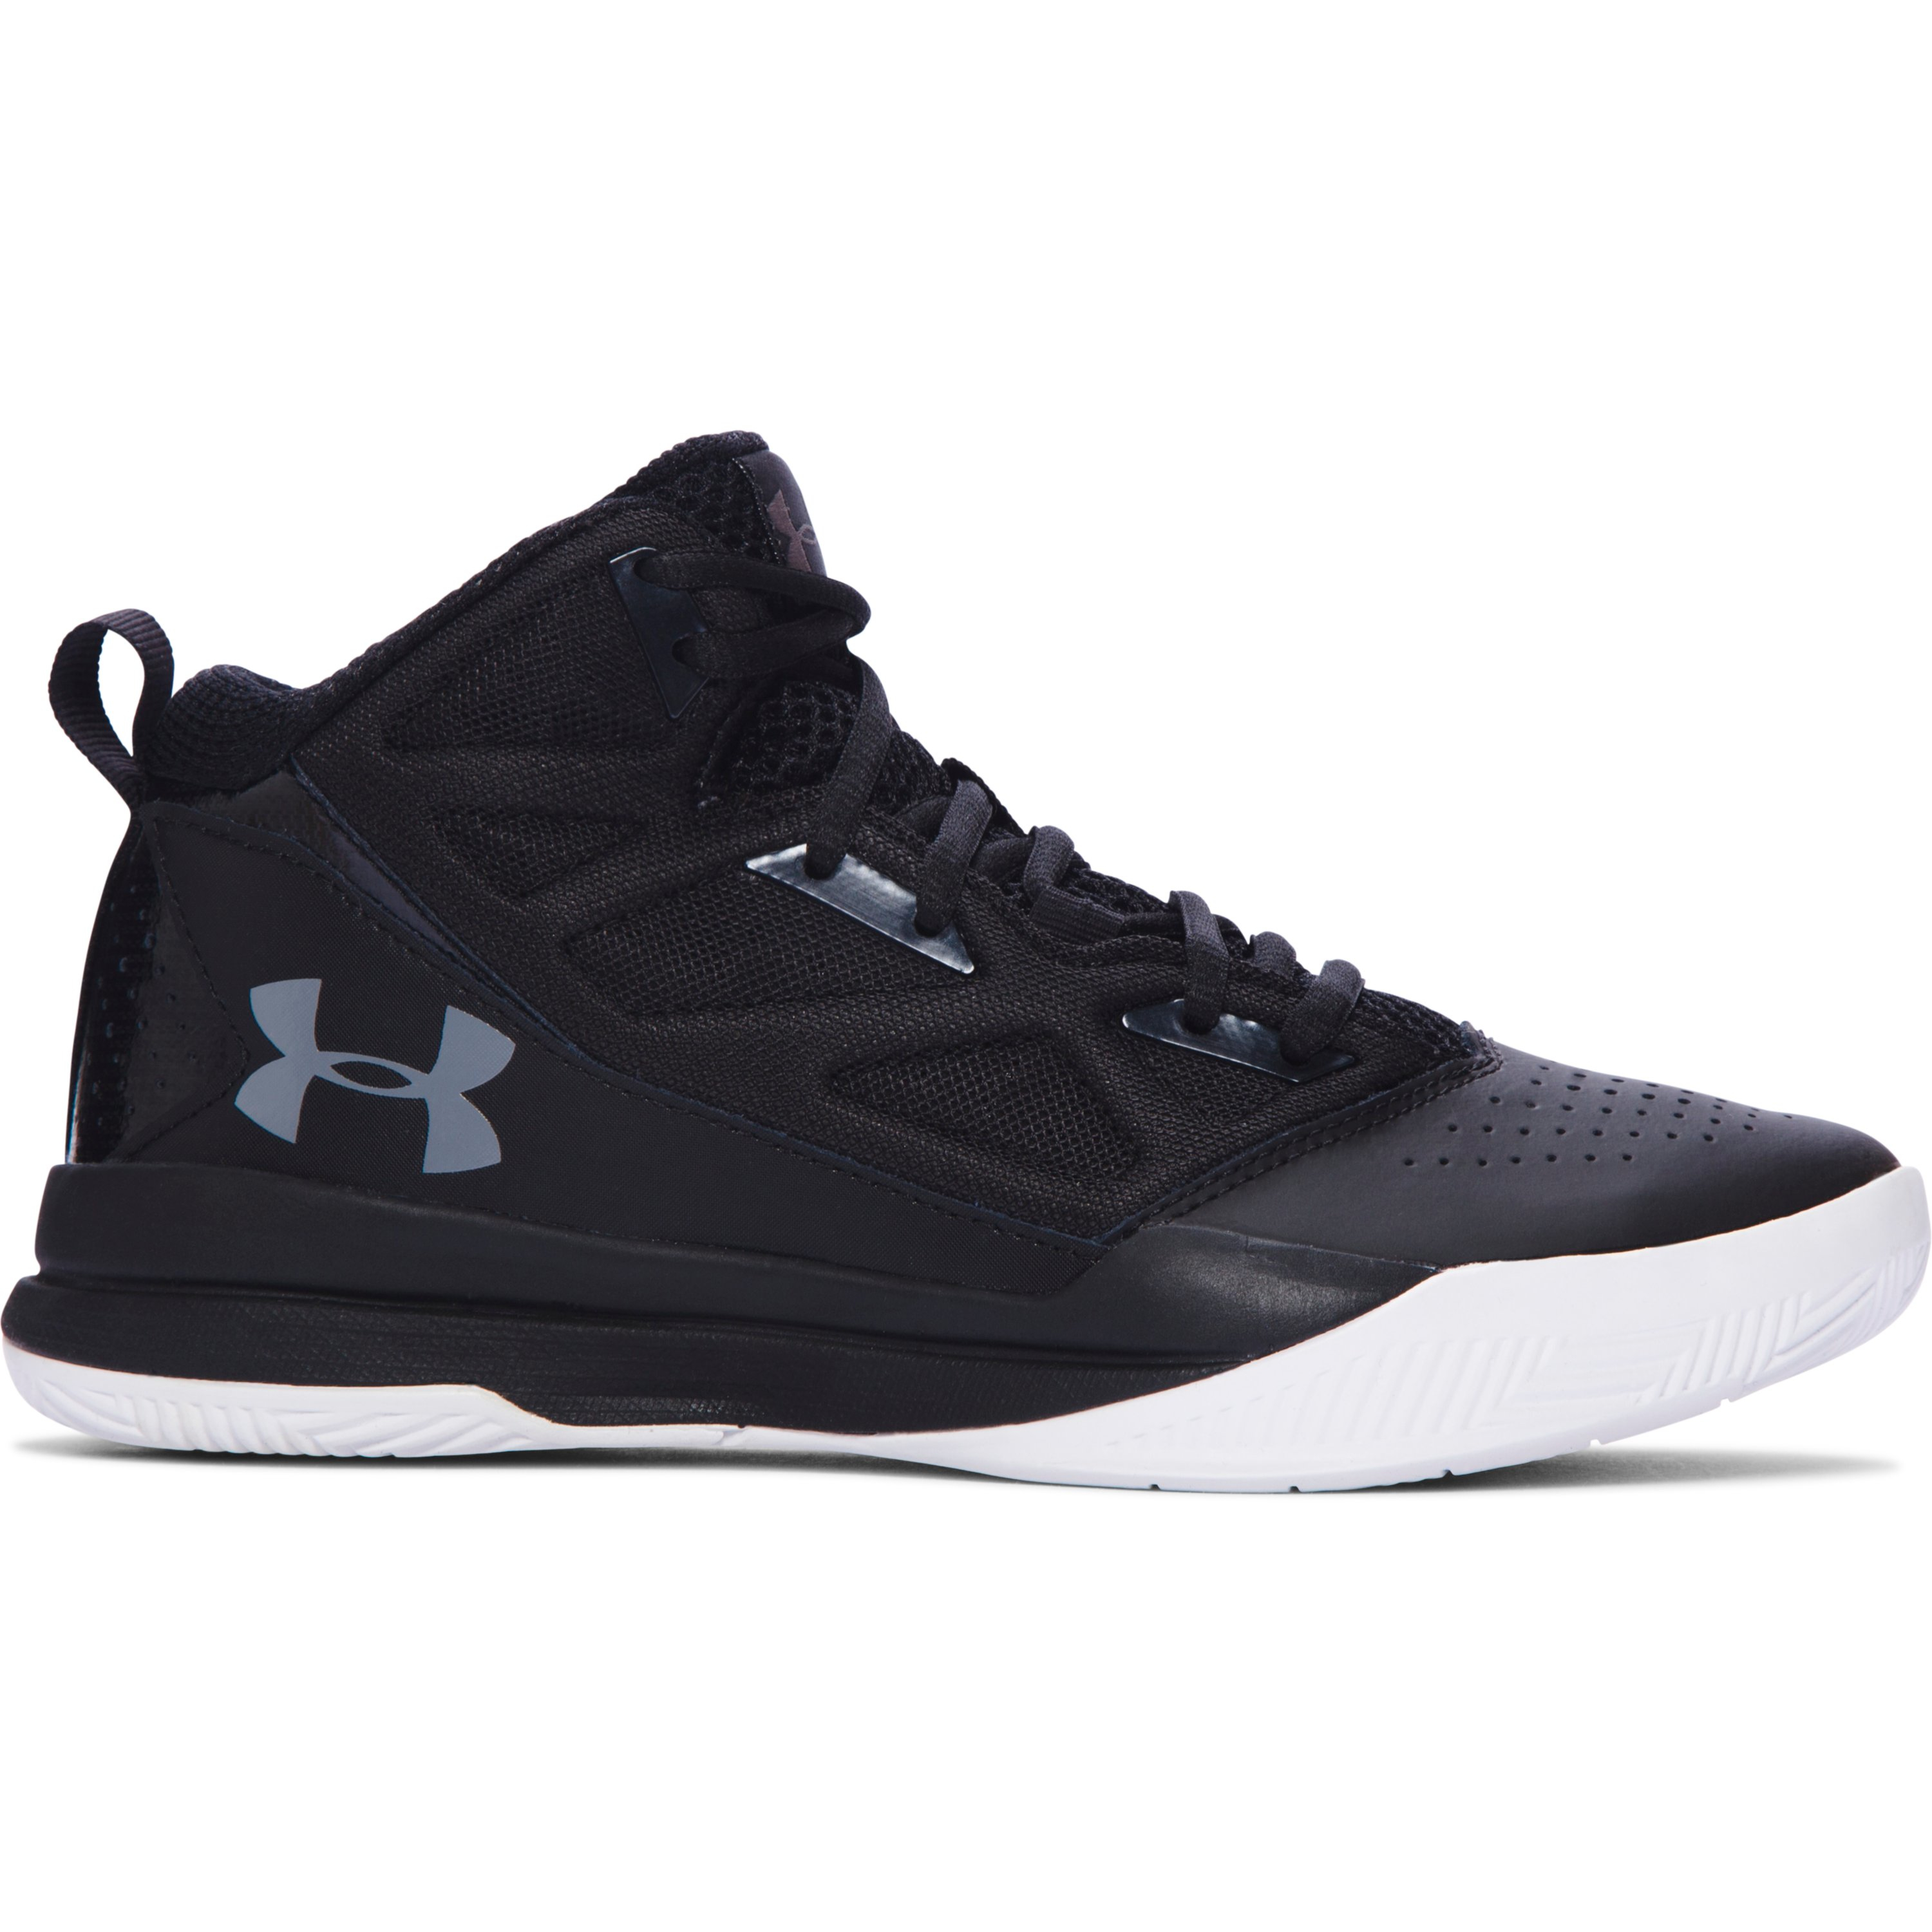 under armour women's jet mid basketball shoes